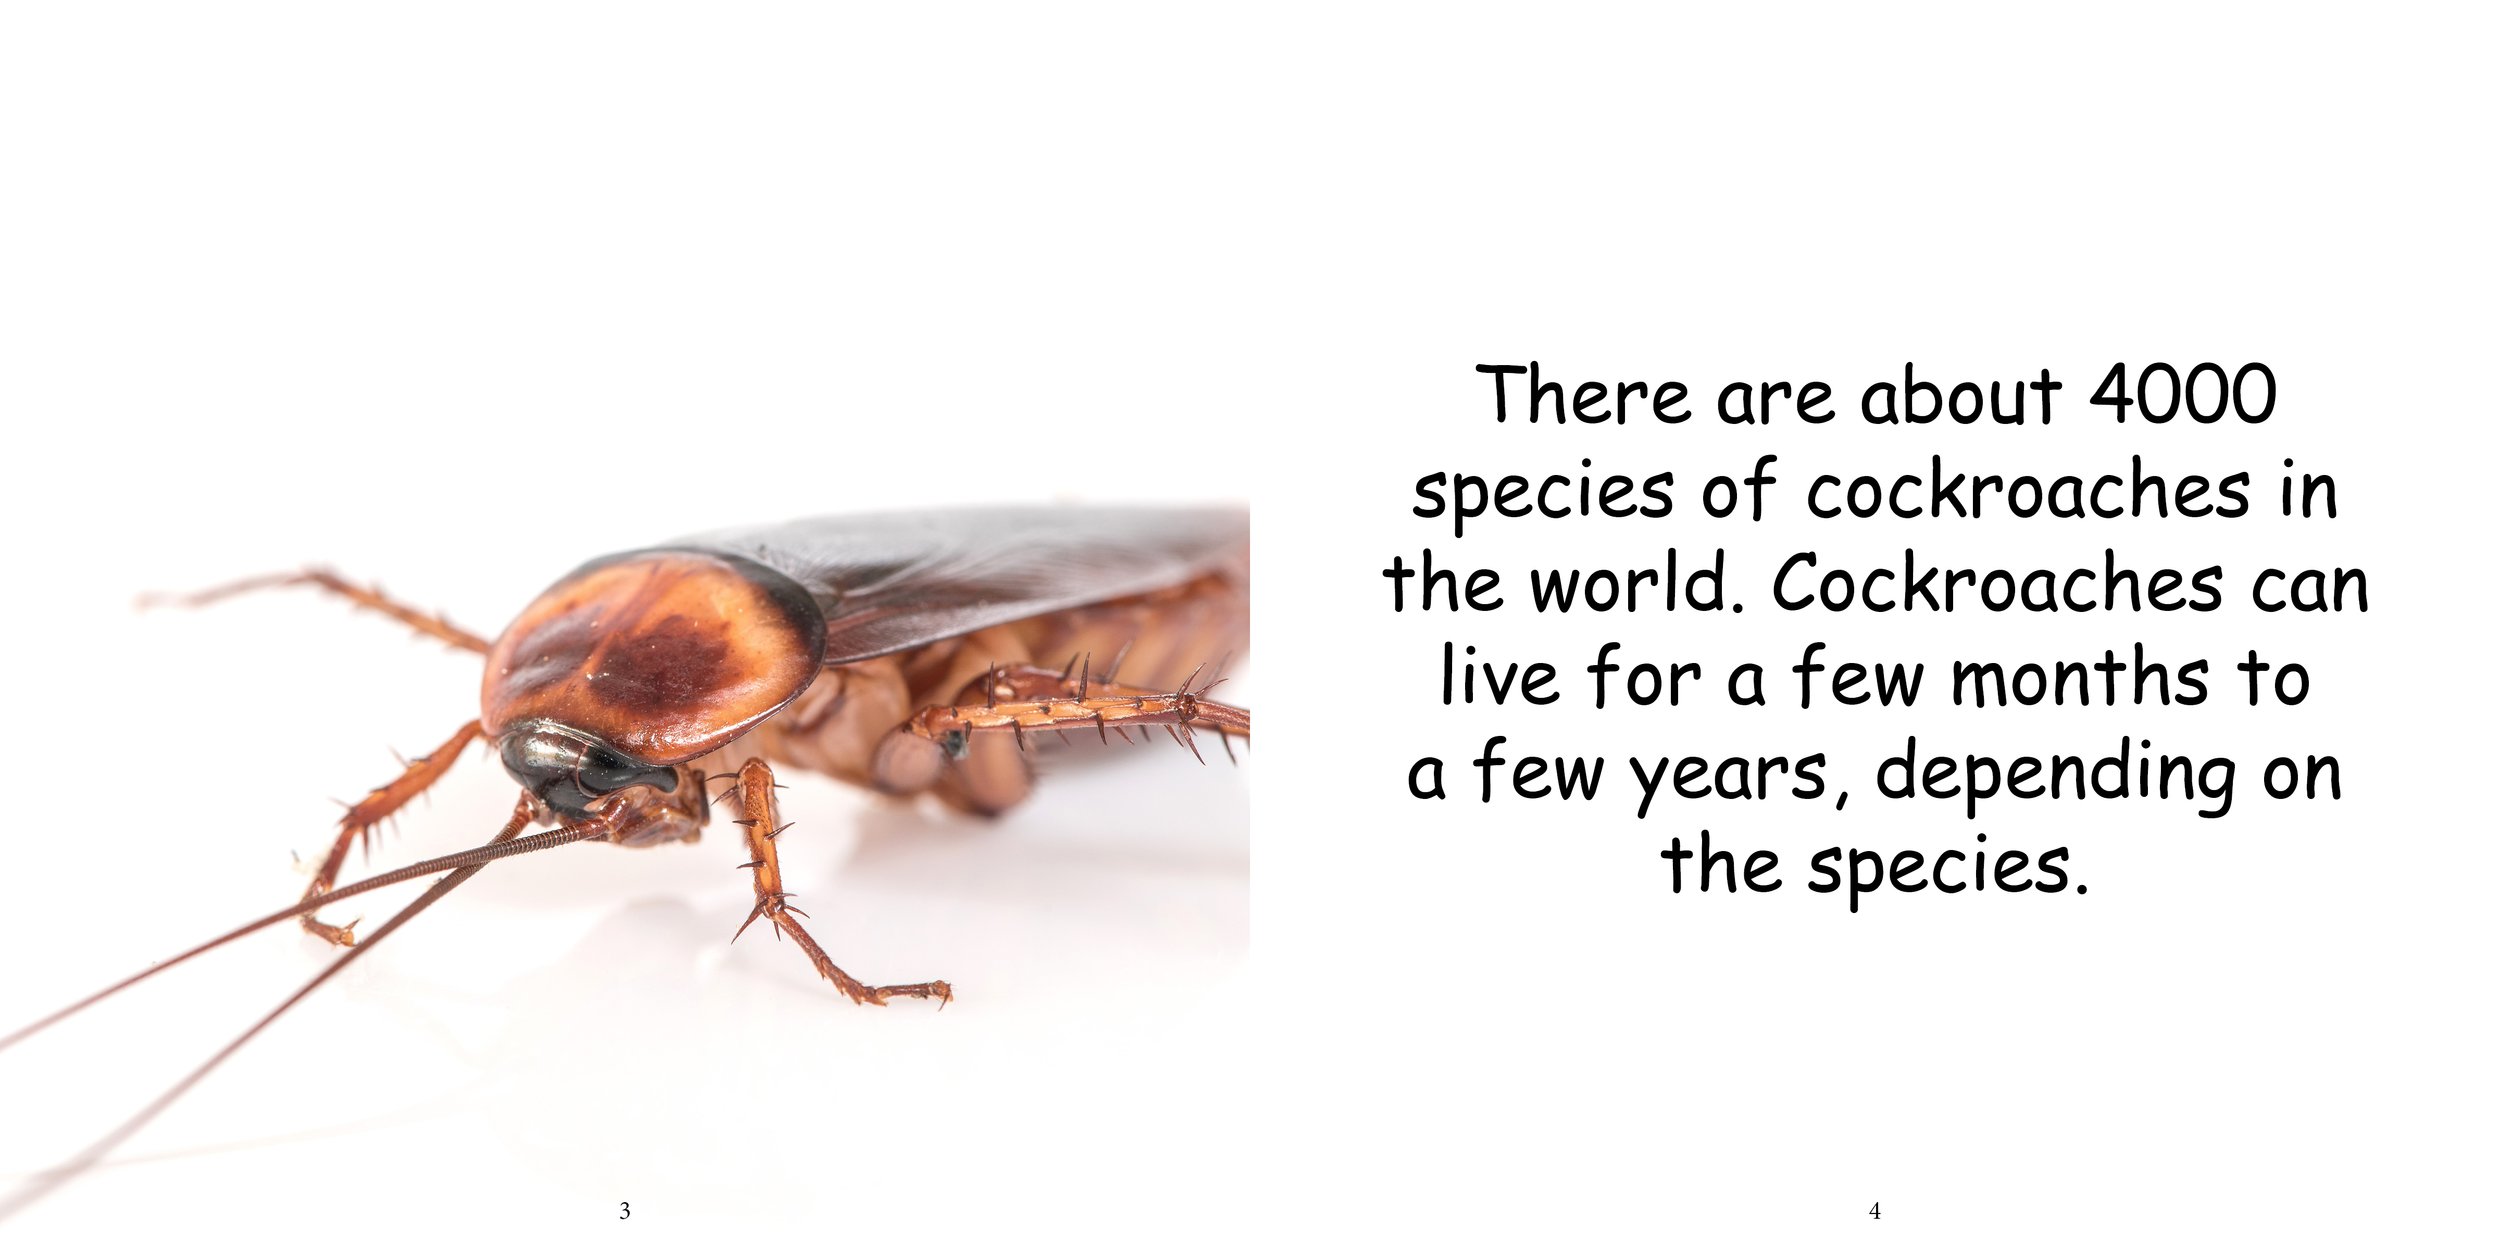 Everything about Cockroaches - Animal Series7.jpg